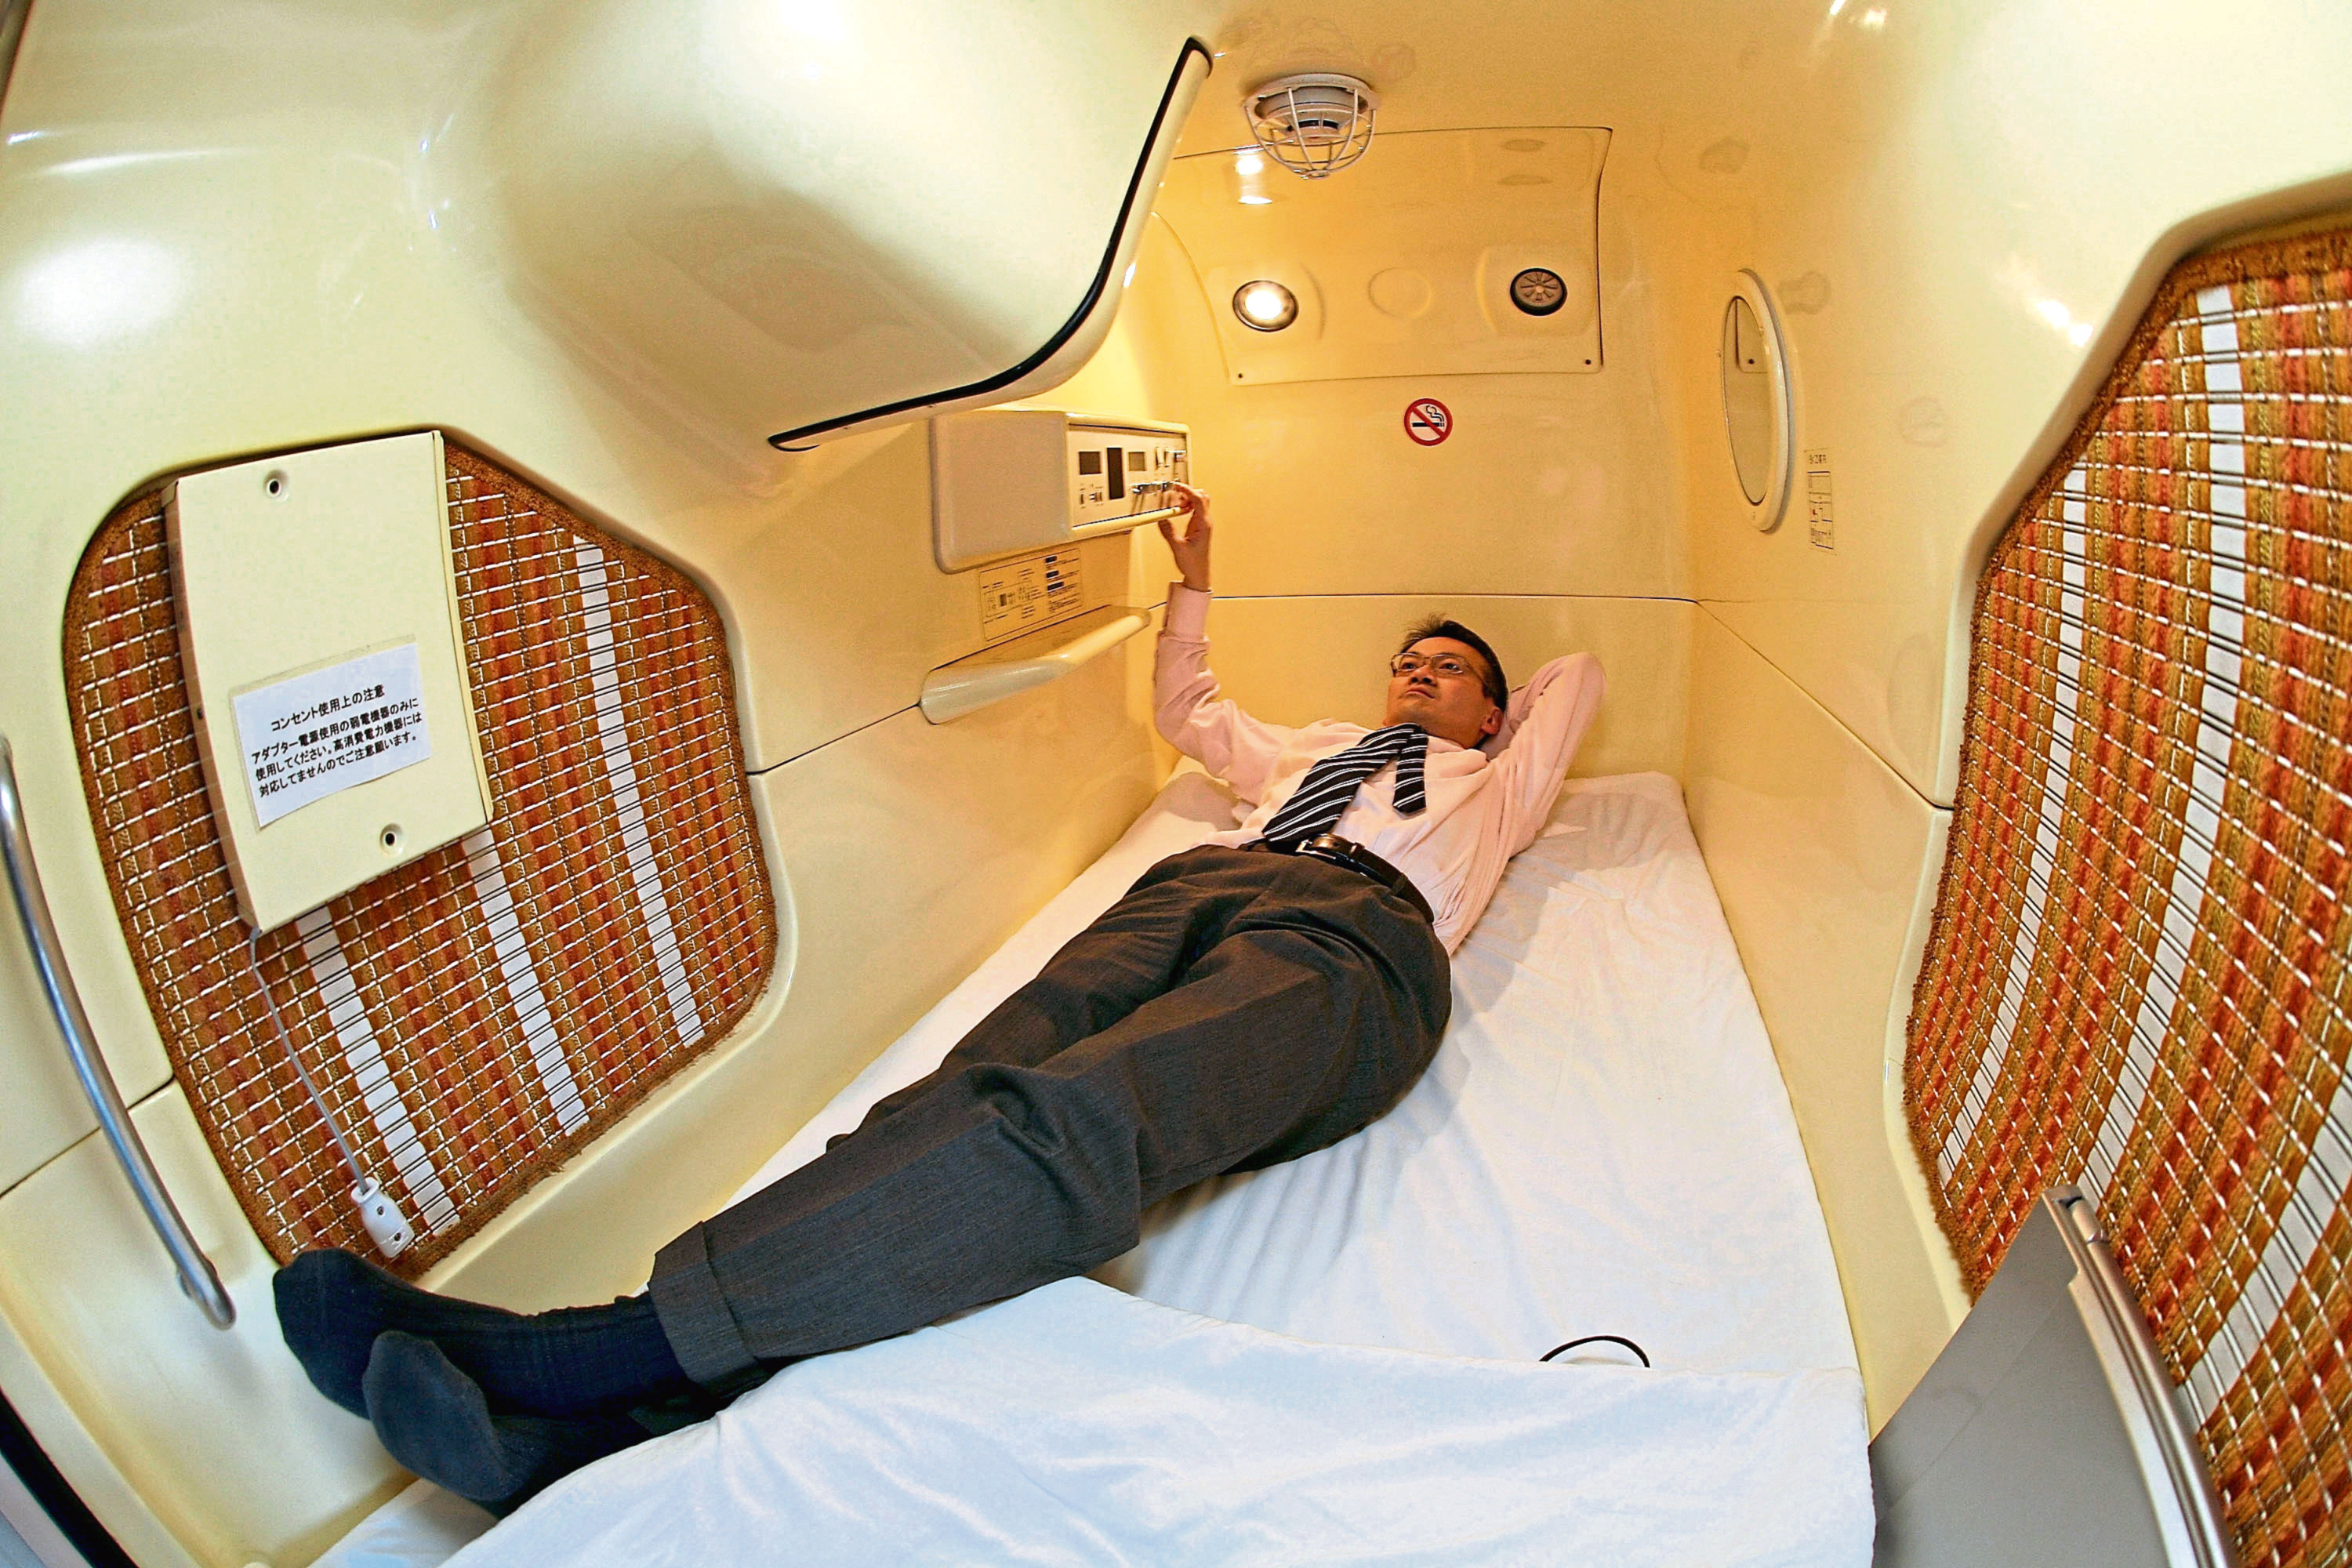 TOKYO - FEBRUARY 6: A visitor relaxes in a sleeping module at Tokyo's tube Hotel "Capsule Inn Akihabara" on February 6, 2007 in Tokyo, Japan. The two-square-meter sleep modules are equipped with a TV, Radio and Wireless LAN and are priced at 3500 yen per night. Uptil recently it has mainly been the office workers who stay at such tube hotels when they cannot go home, but recently they are attracting many foreign travellers due to their Japanese style. (Photo by Koichi Kamoshida/Getty Images)